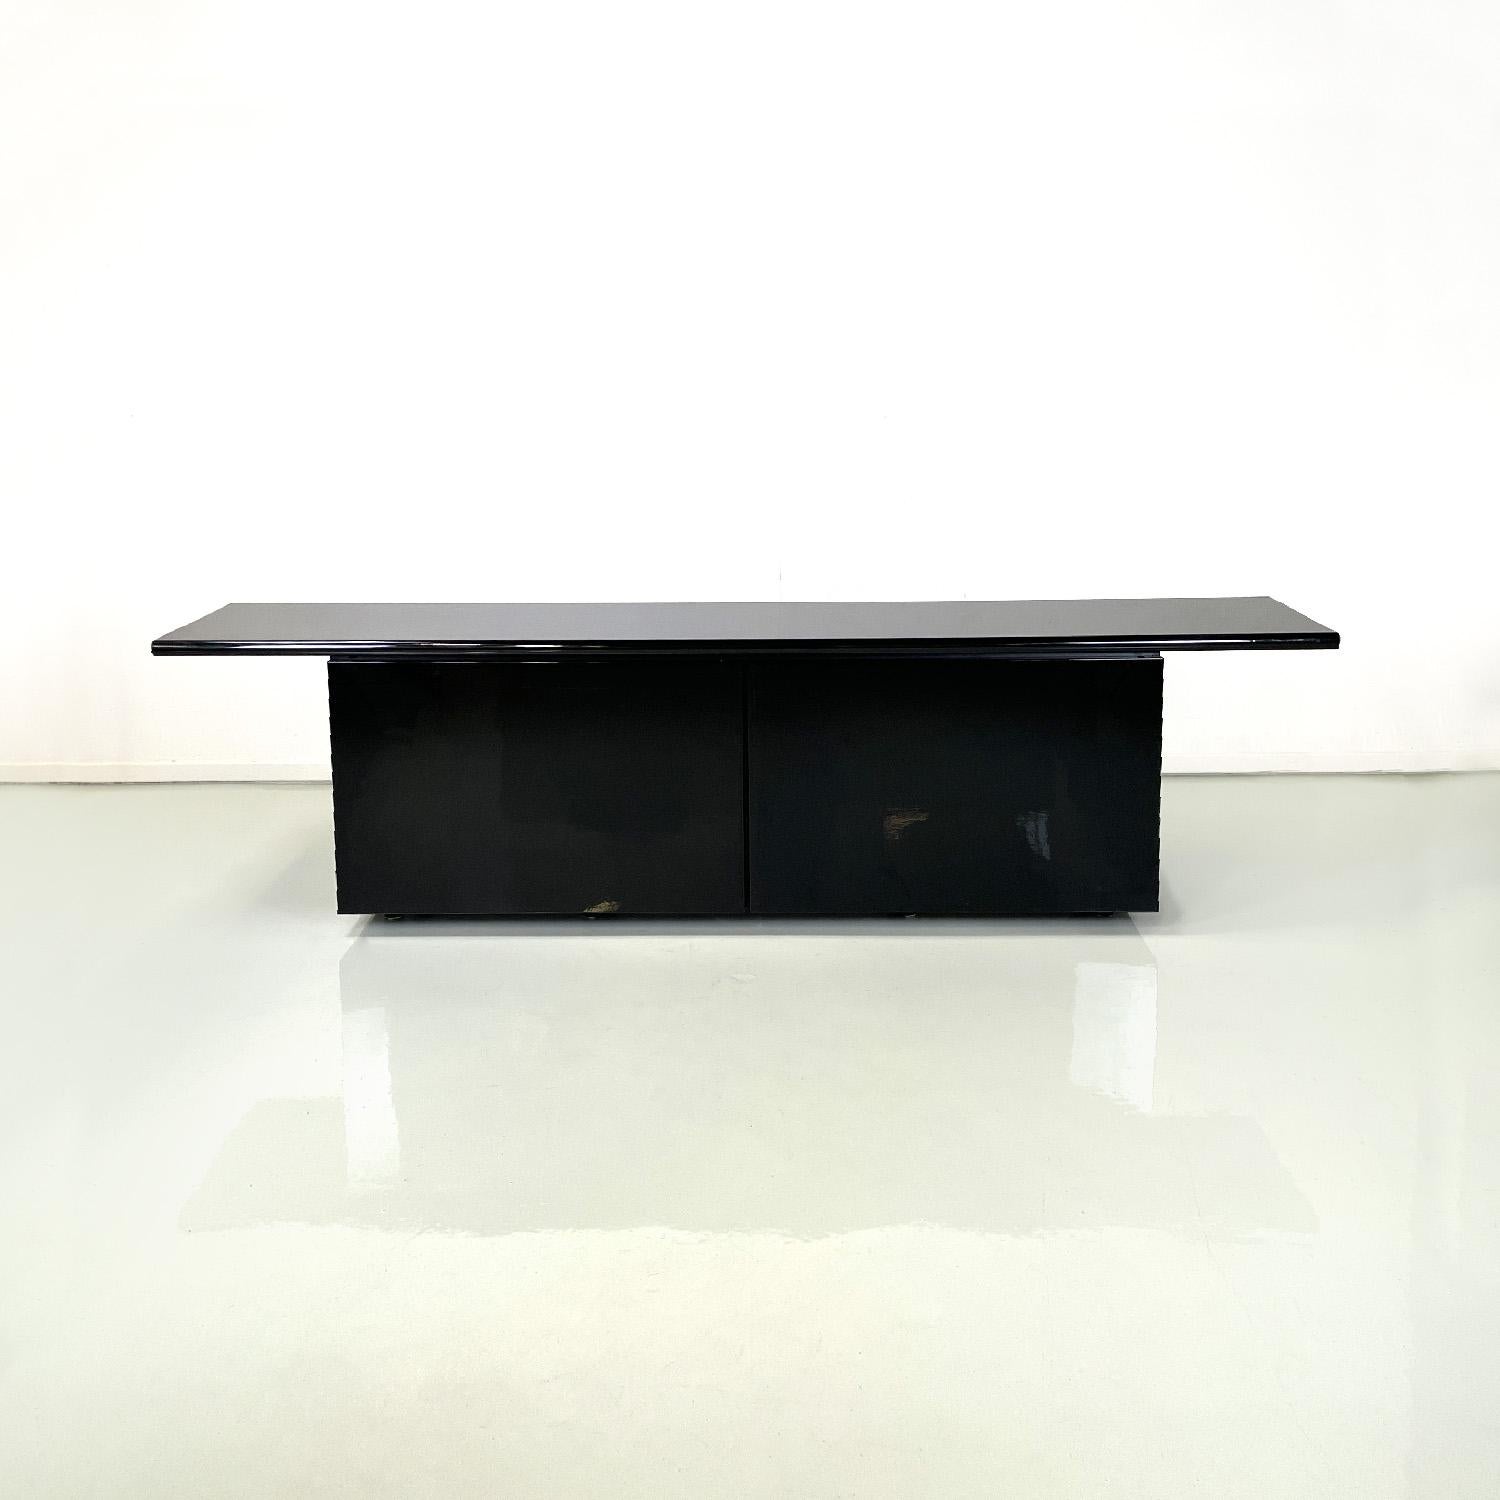 Italian modern black sideboard Sheraton by Stoppino and Acerbis for Acerbis 1977
Sideboard mod. Sheraton in glossy black lacquered wood. The rectangular top has a beveled front edge. On the front it has three compartments with glass shelves, the two